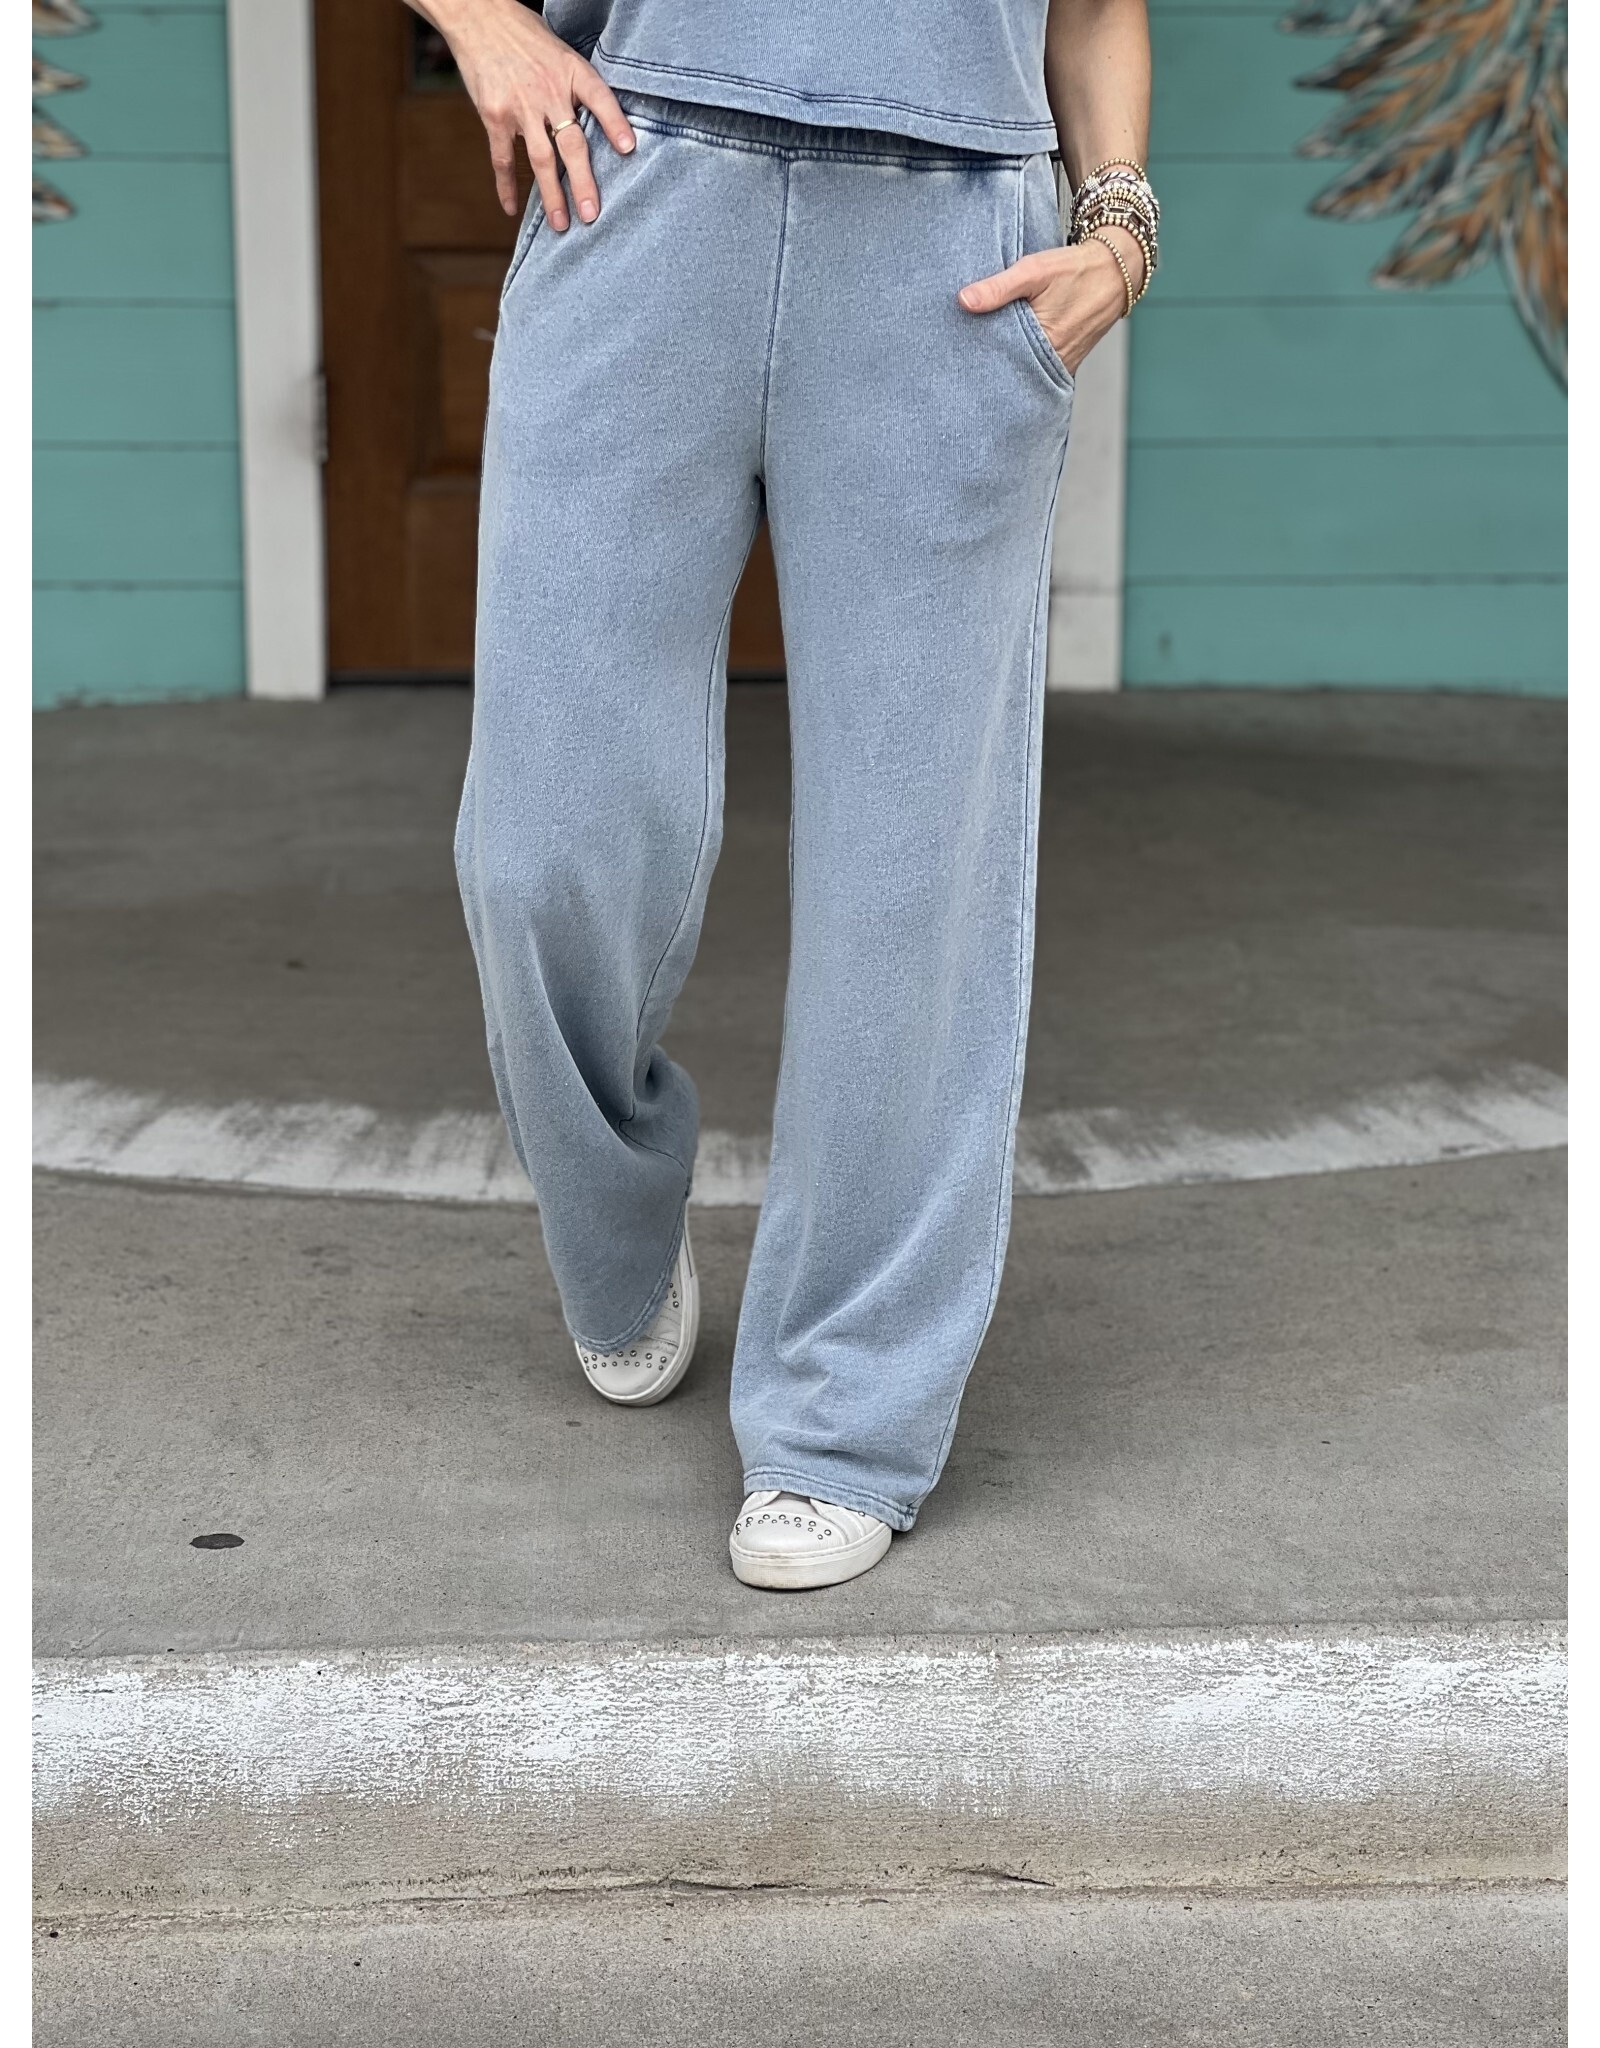 Washed Denim Terry Pants